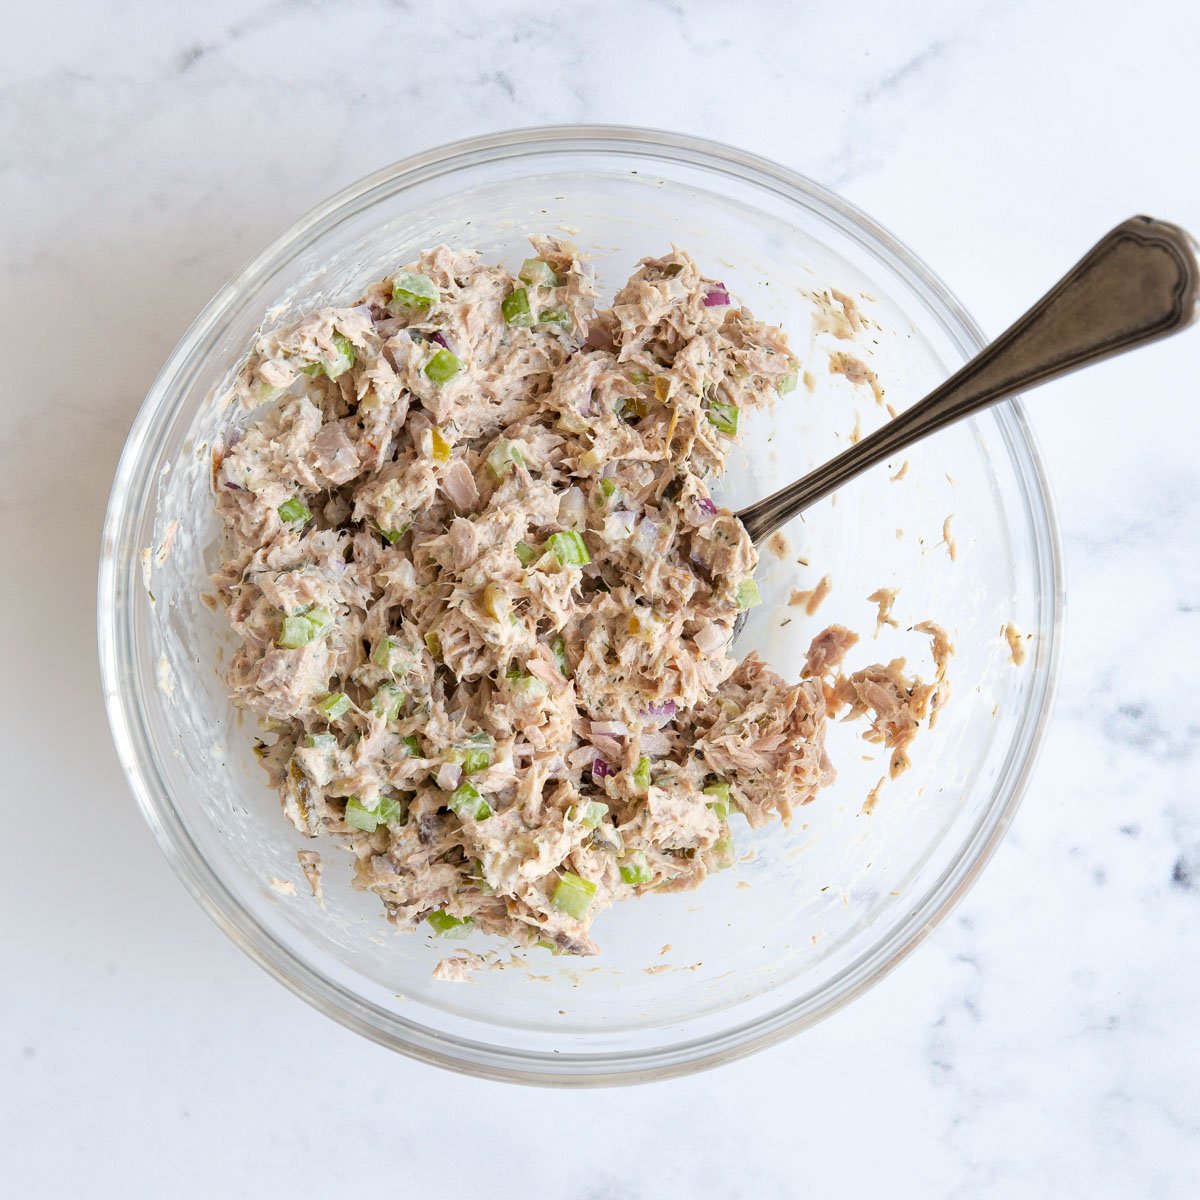 Overhead view of tuna fish salad in a bowl with a spoon.